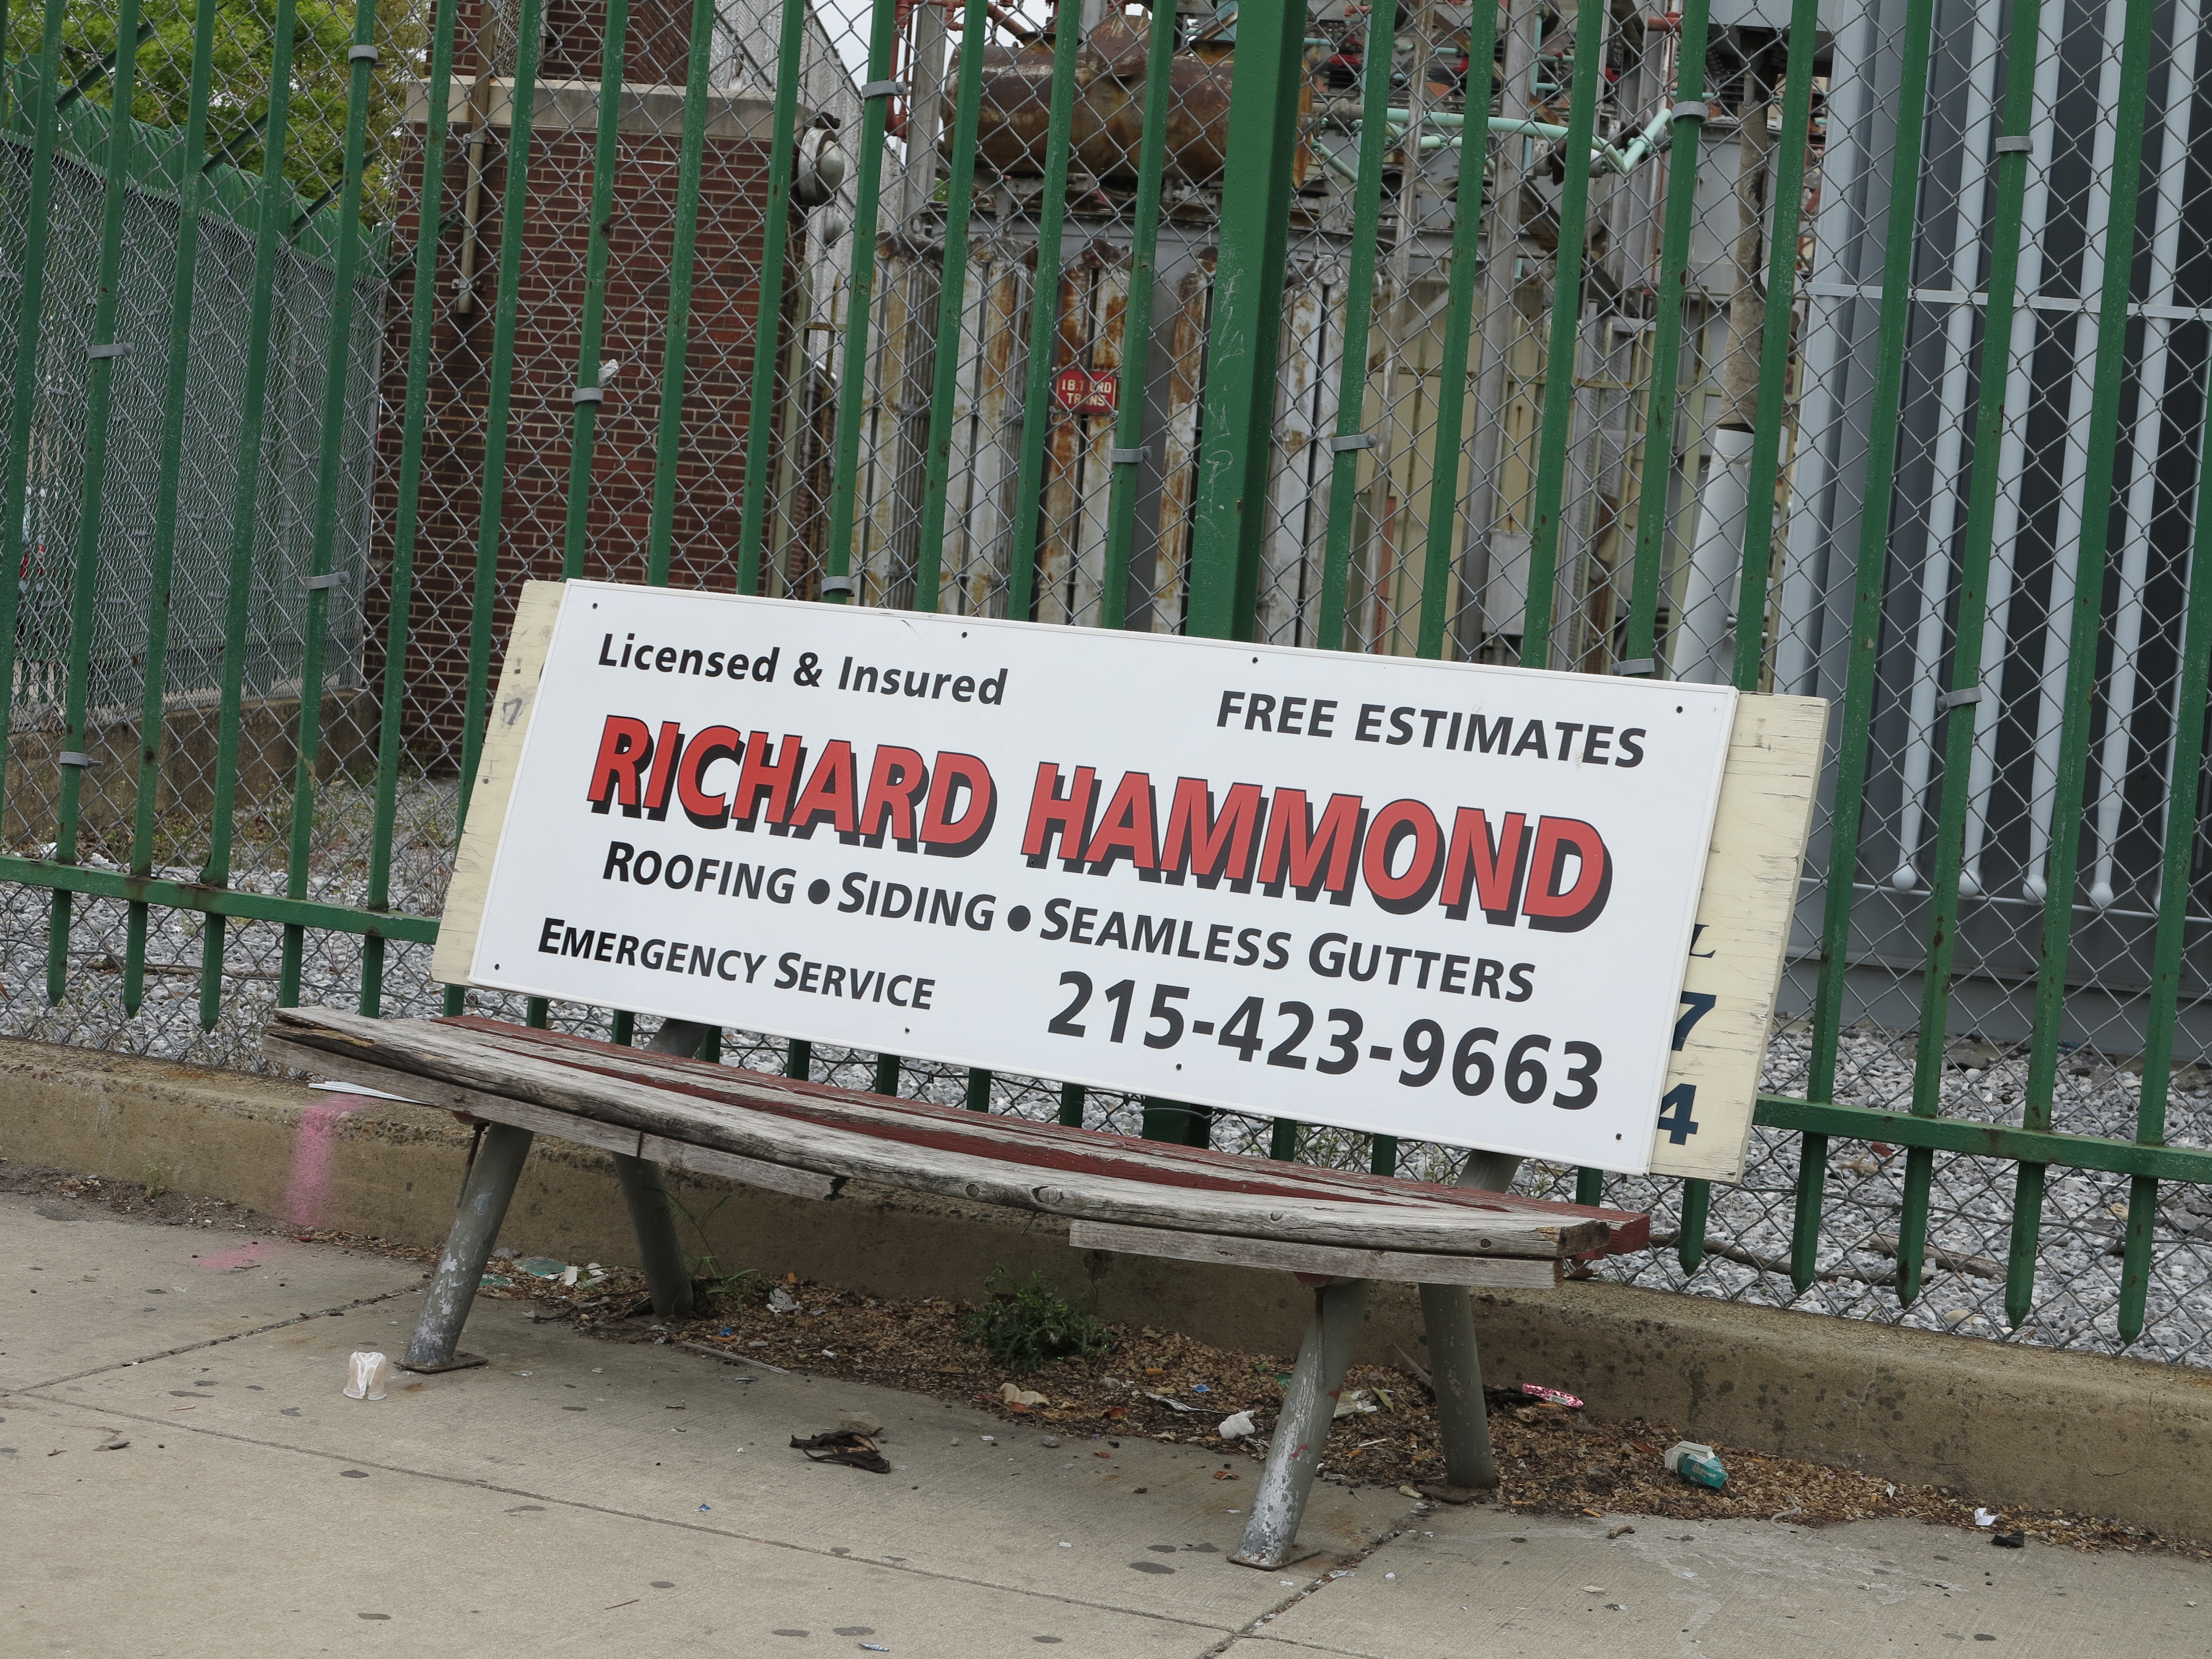 Another ad-over-ad bench in poor condition. Columbia Street at Delaware Avenue near PECO substation, May 2013.